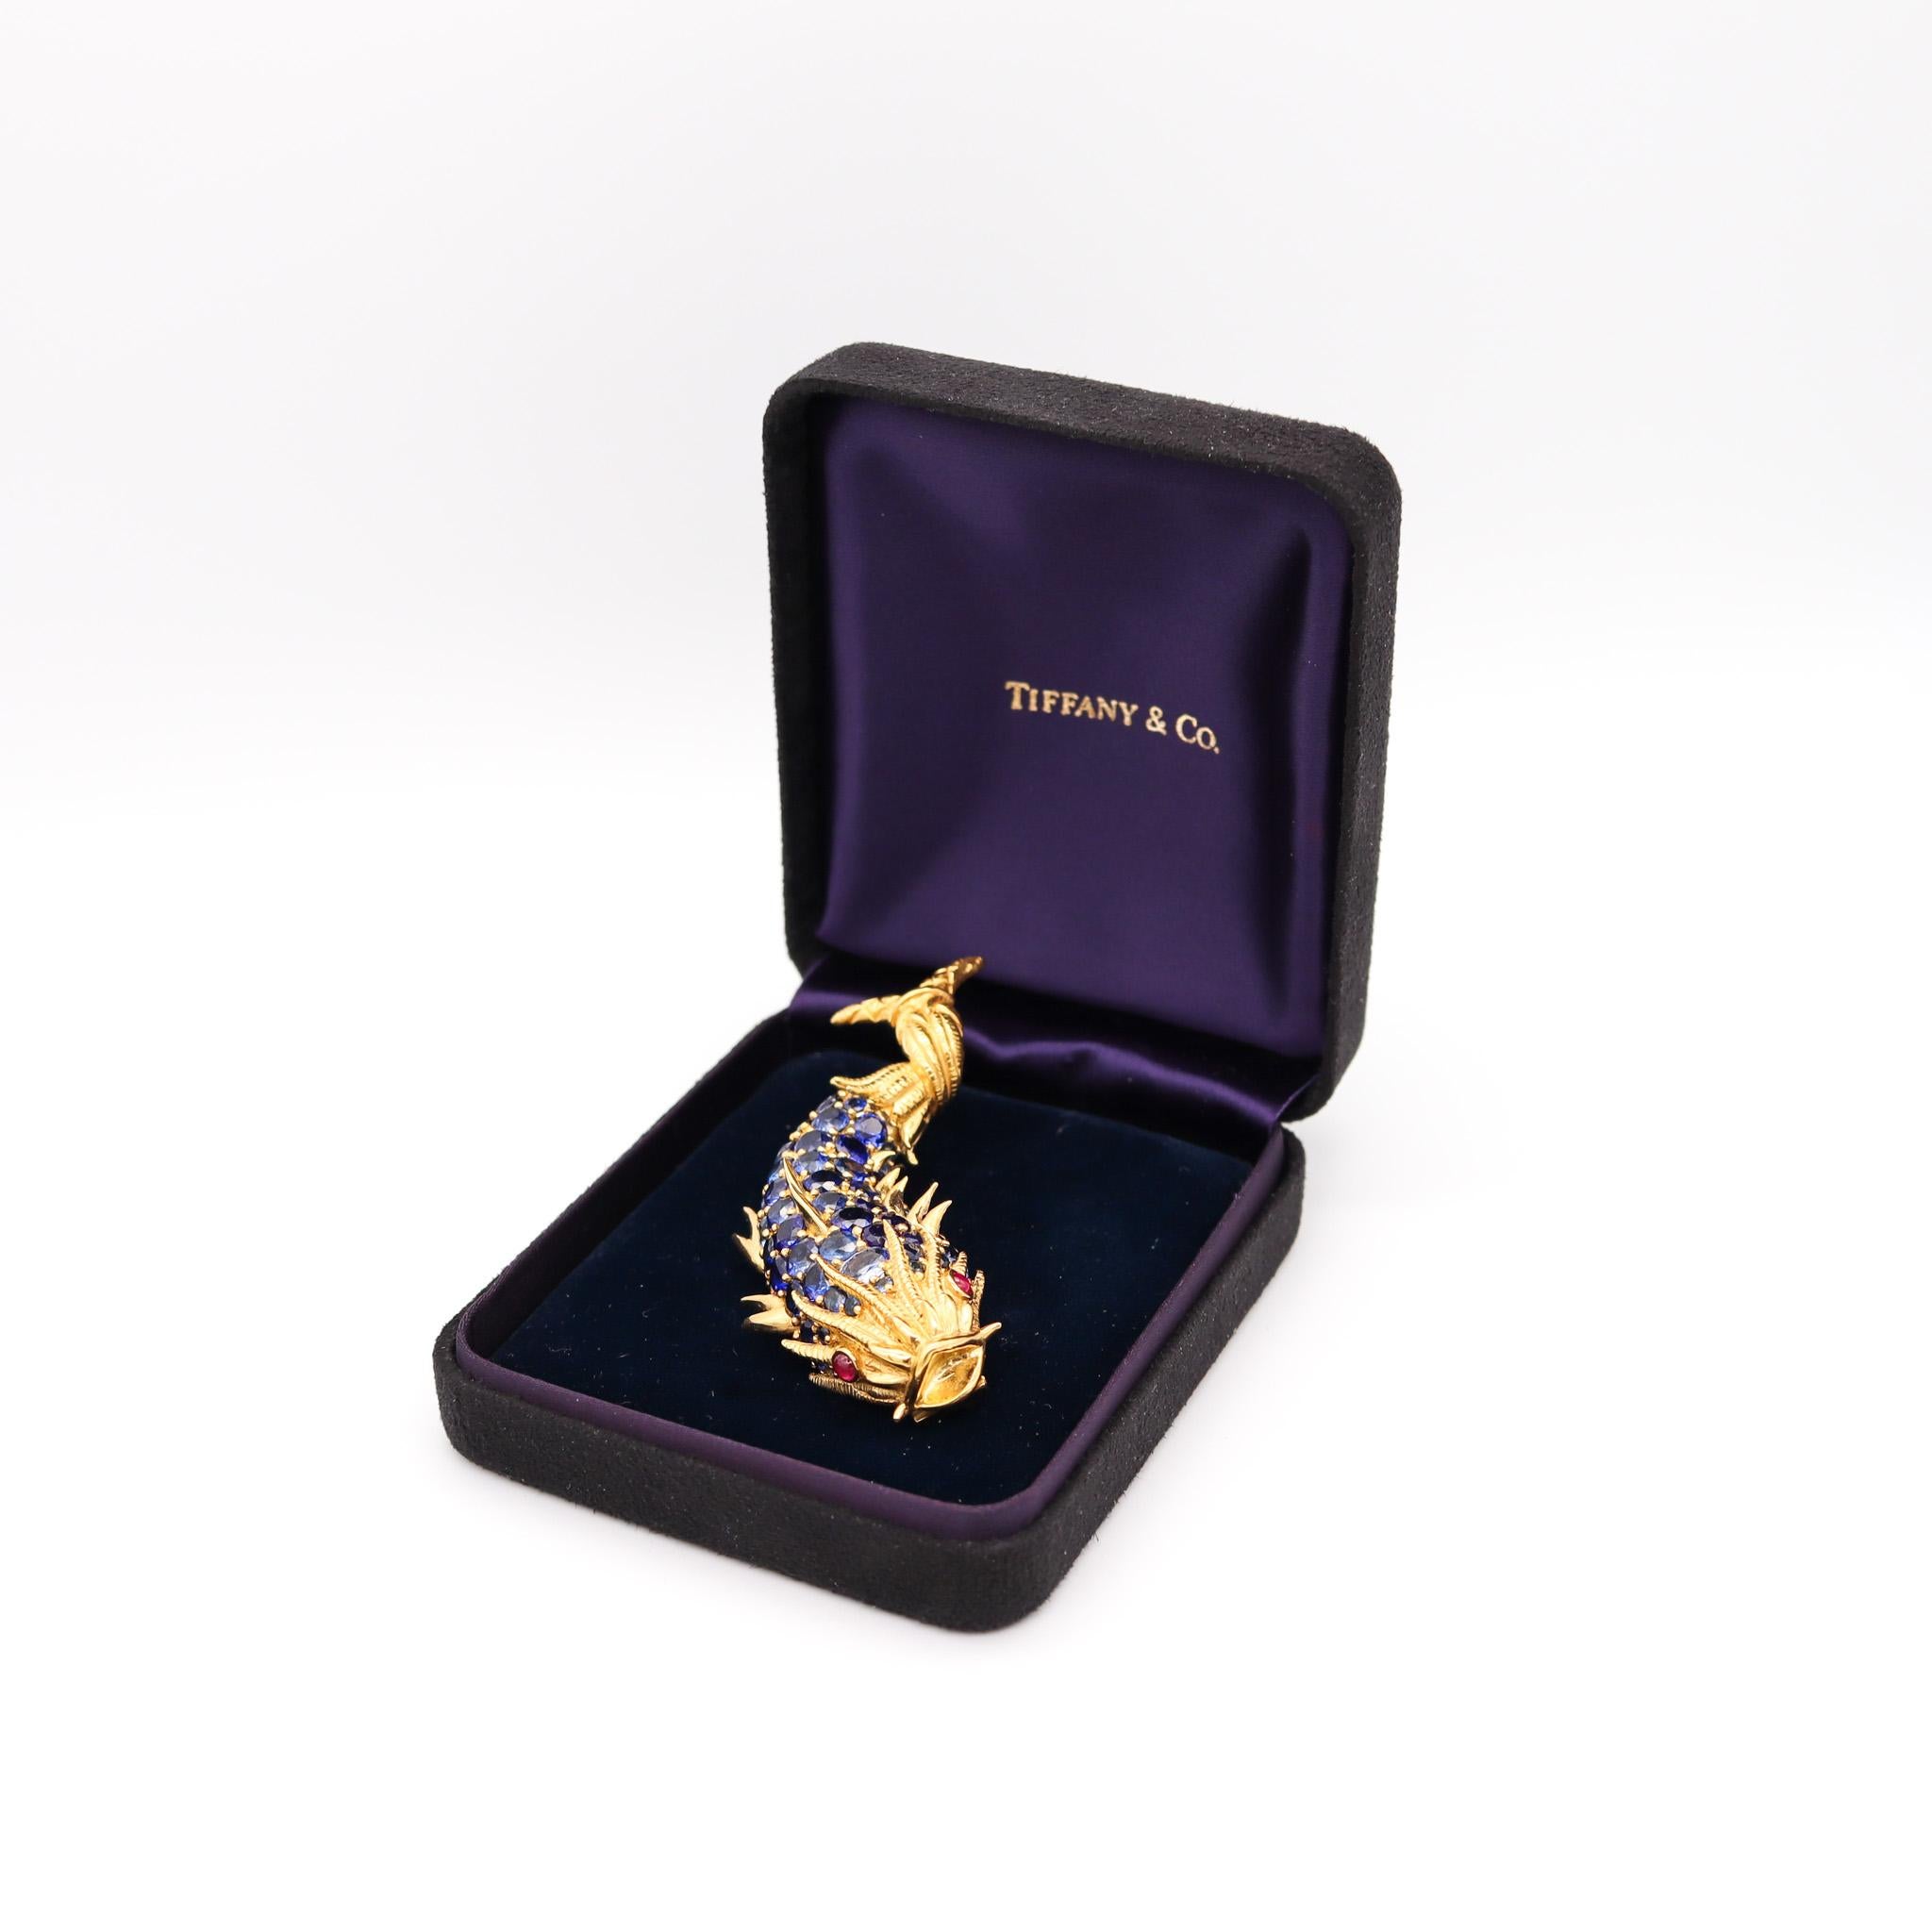 Tiffany & Co 1968 Mythological Fish Brooch in 18kt Gold with 60.05 Ctw Sapphires For Sale 2